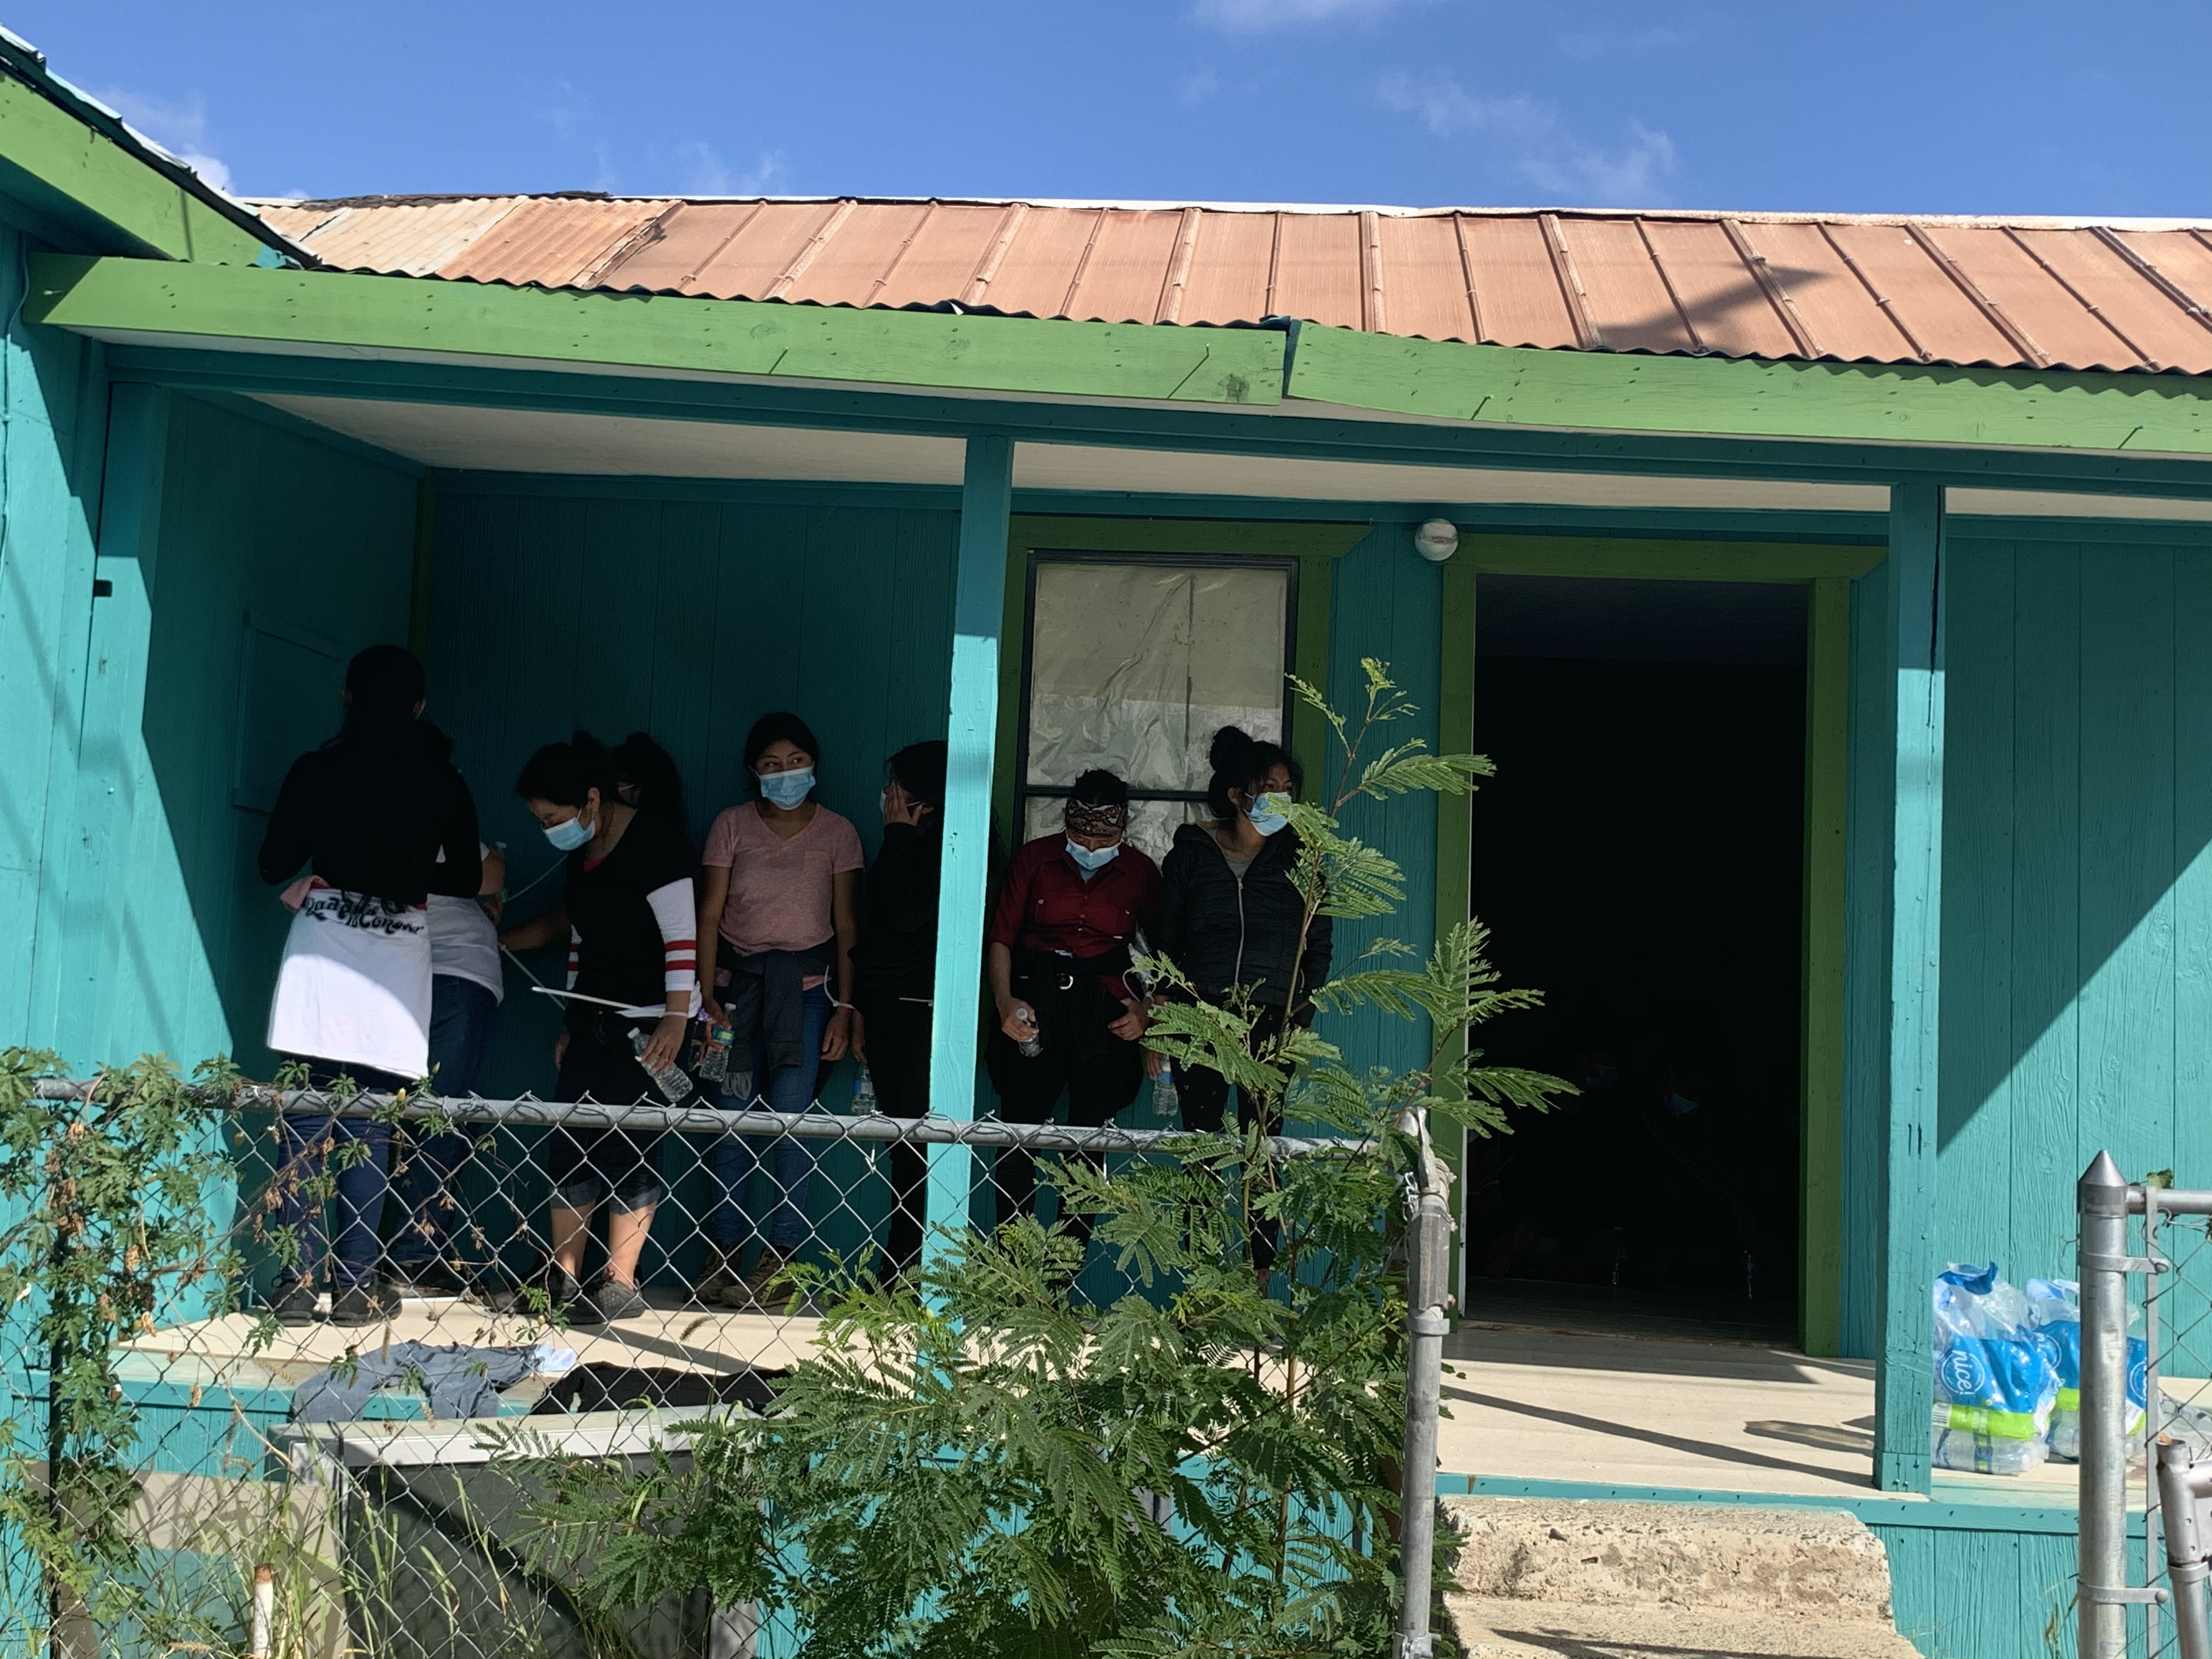 South Texas stash house discovered by ICE At-Large Team